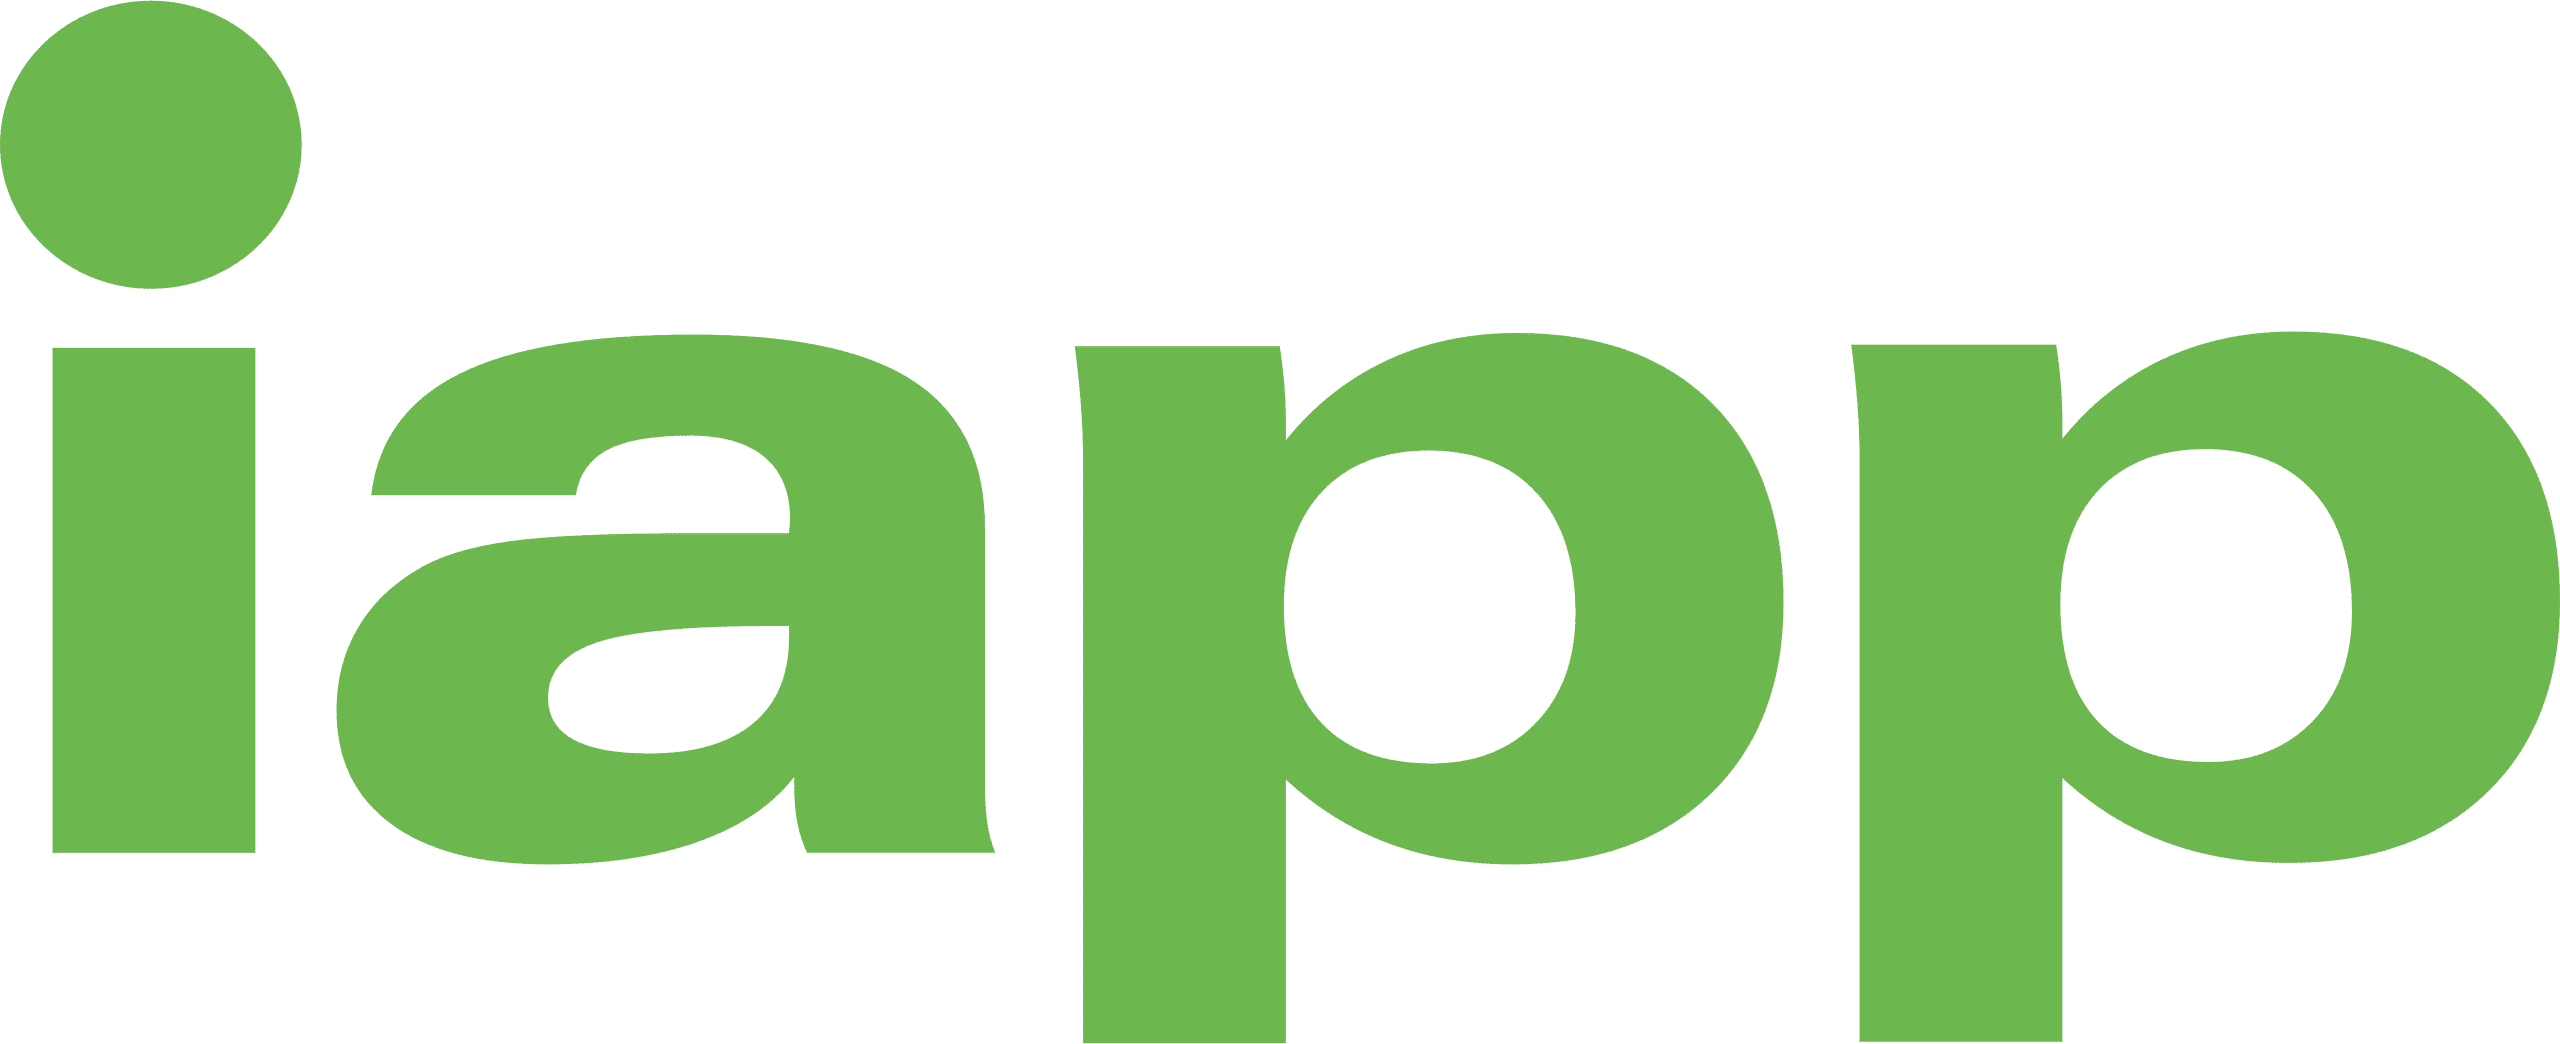 CIPT Exam Dumps Get Complete IAPP Study Package With Discount